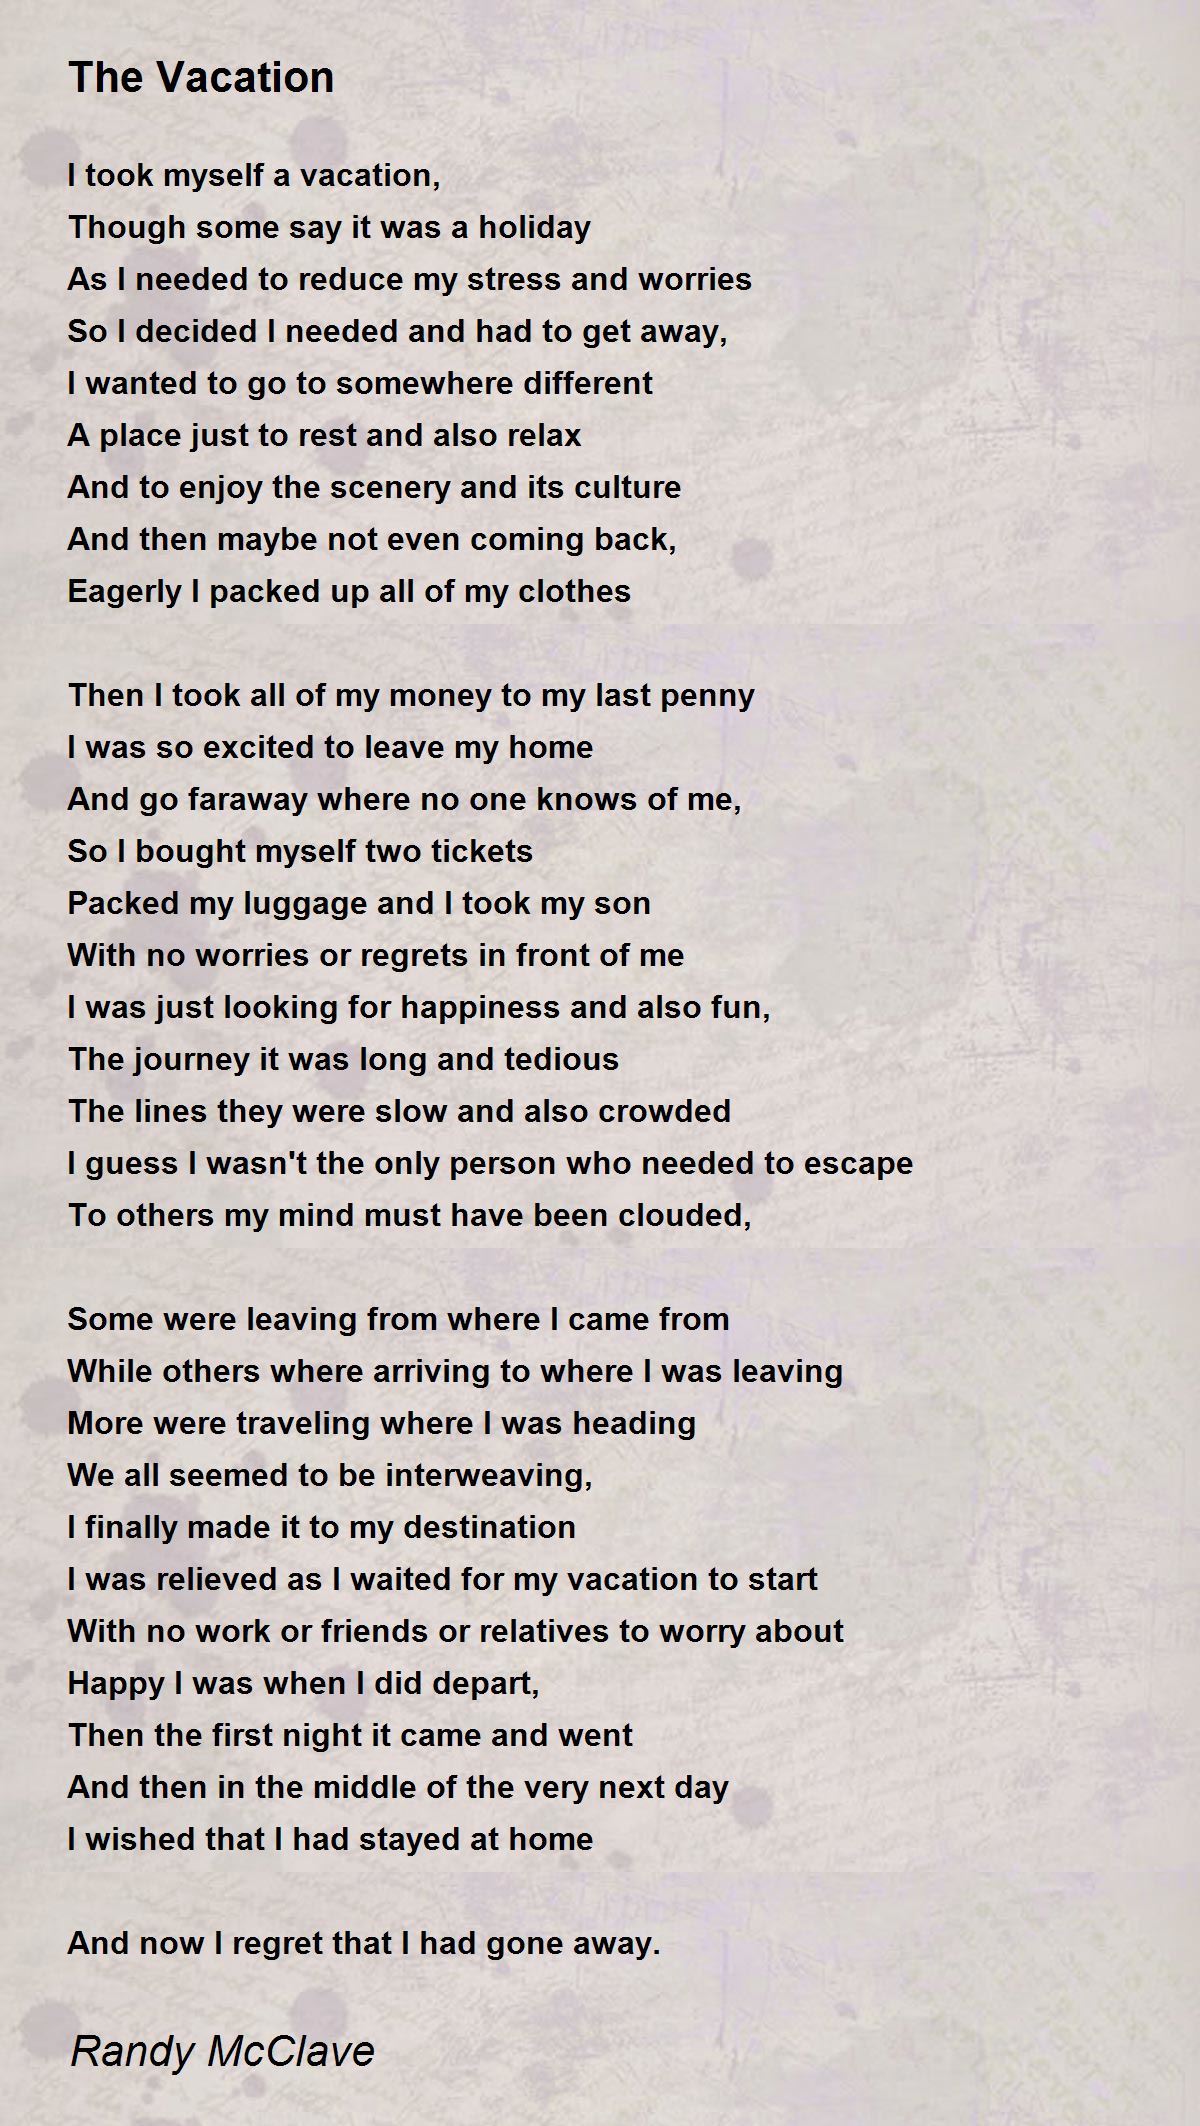 The Vacation - The Vacation Poem by Randy McClave